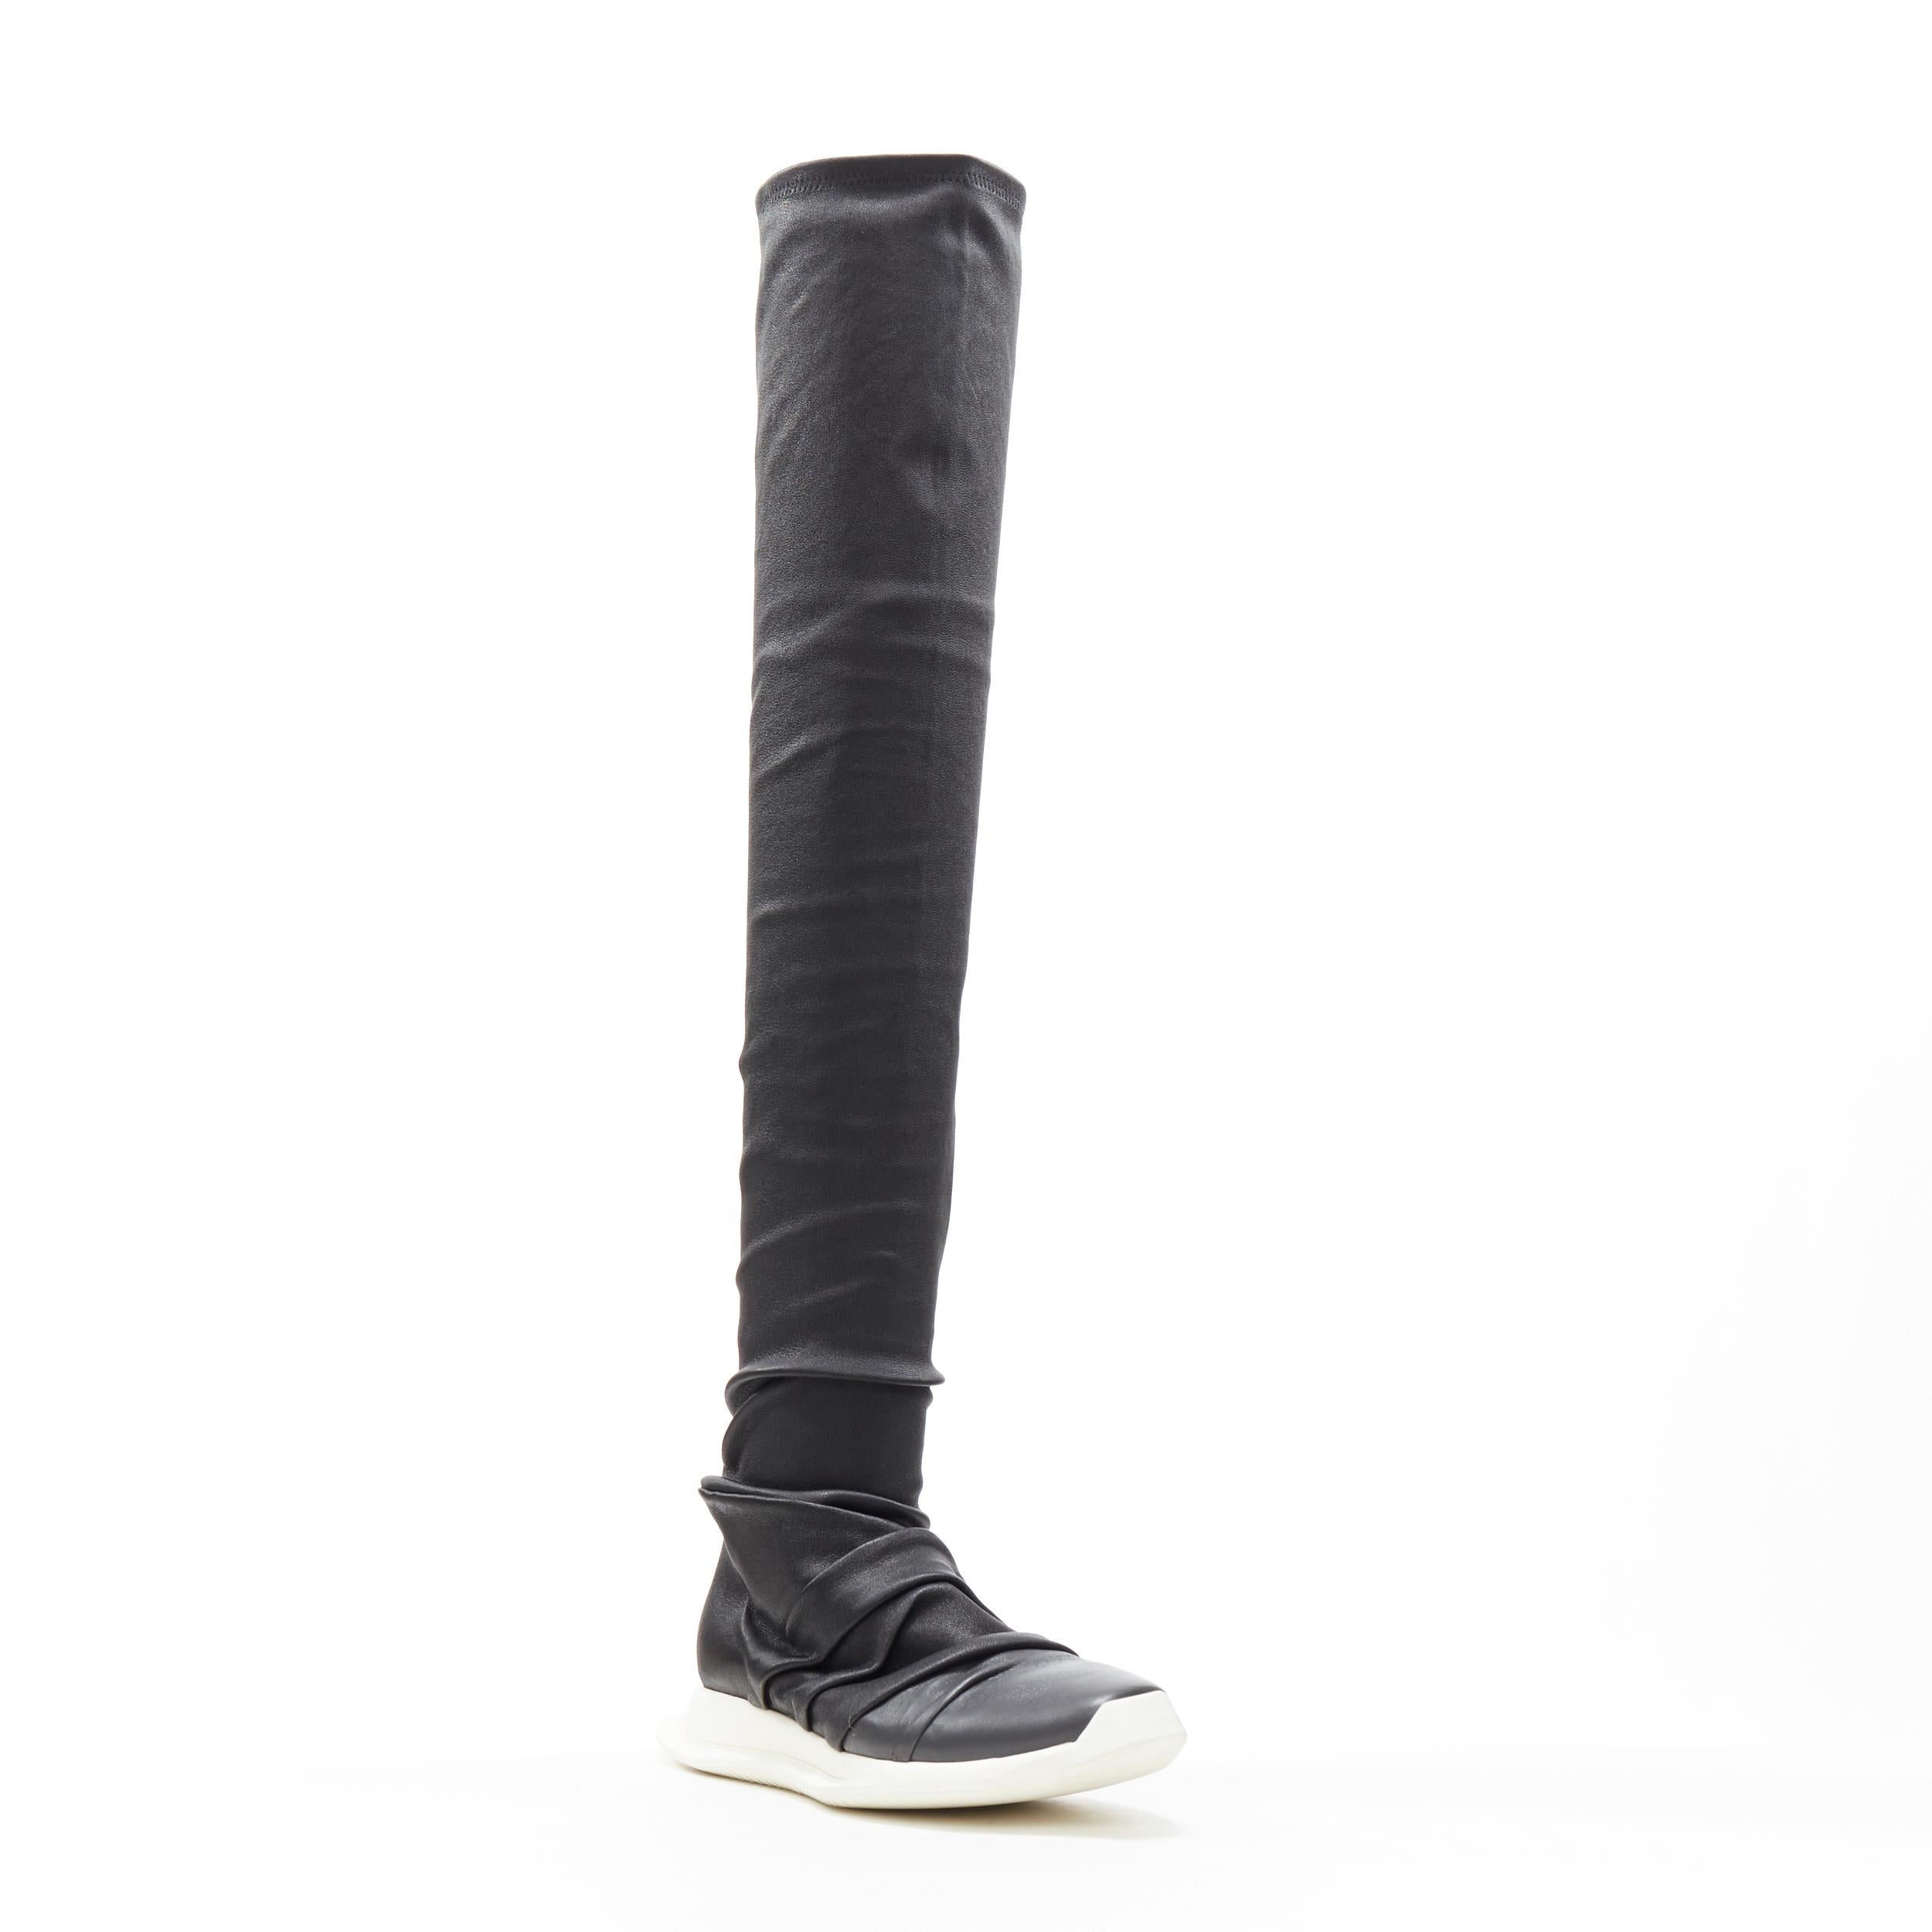 new RICK OWENS Draped Olique Runner Stocking black knee high sneaker boots EU37
Brand: Rick Owens
Designer: Rick Owens
Model Name / Style: Sneaker boot
Material: Leather
Color: Black
Pattern: Solid
Closure: Pull on
Extra Detail: Draped detail at